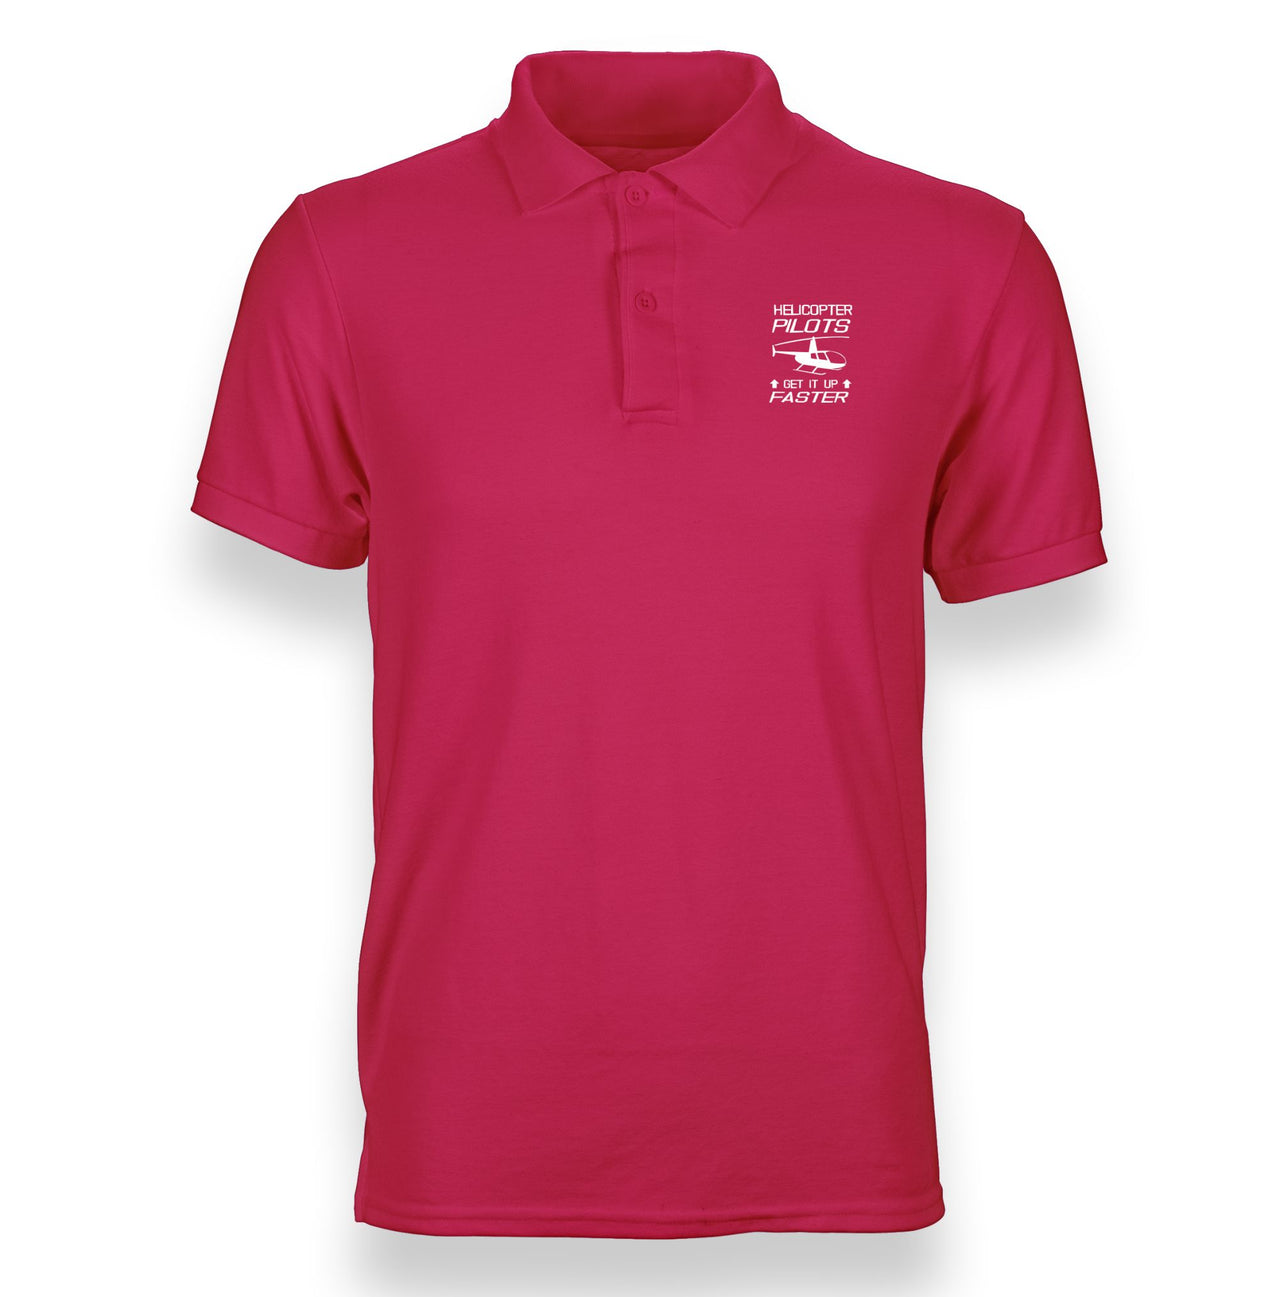 Helicopter Pilots Get It Up Faster Designed "WOMEN" Polo T-Shirts